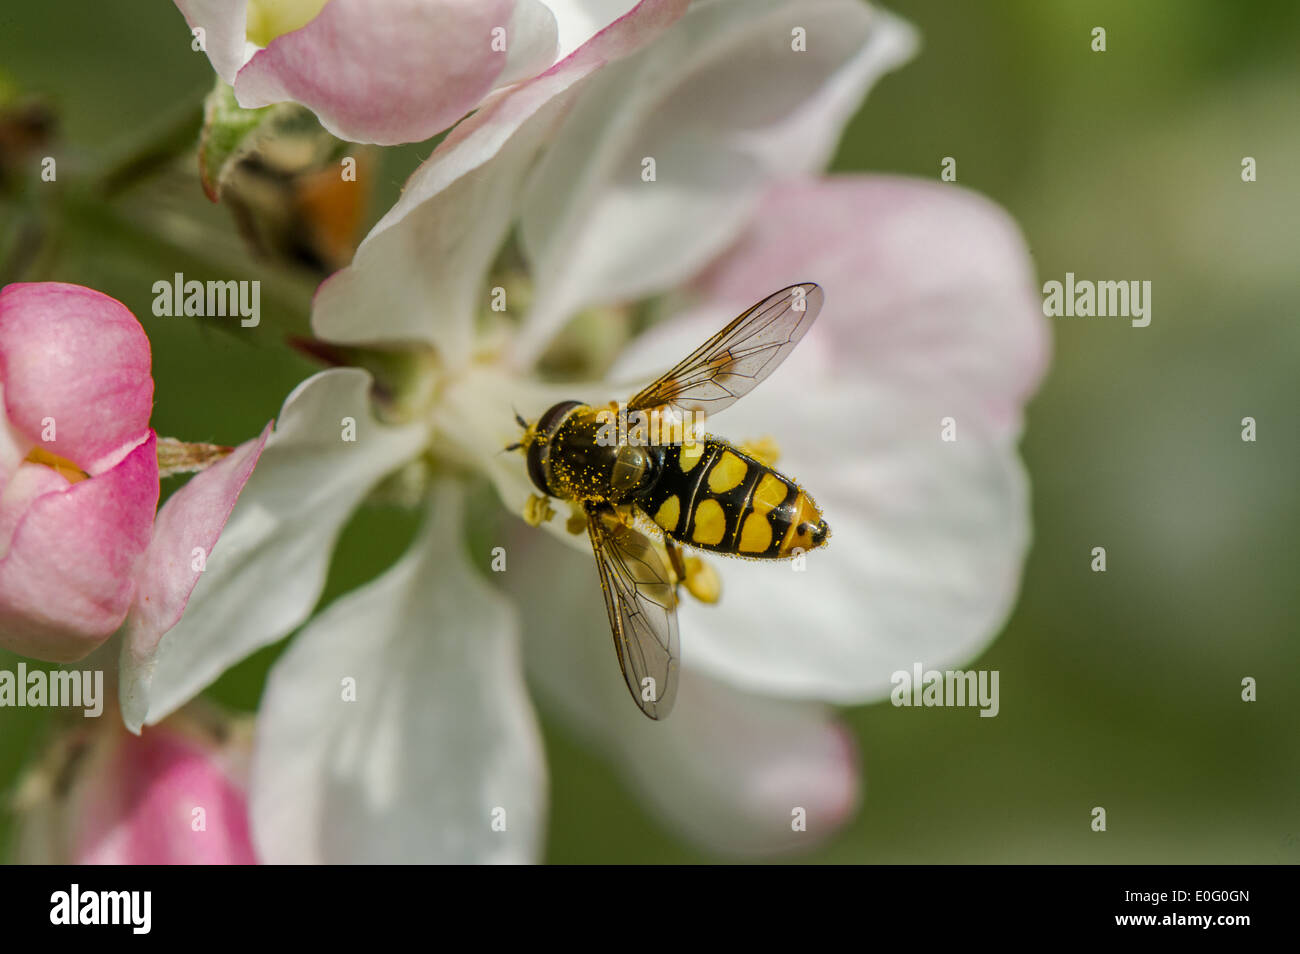 Hoverfly collecting nectar and pollen from apple blossom. Stock Photo